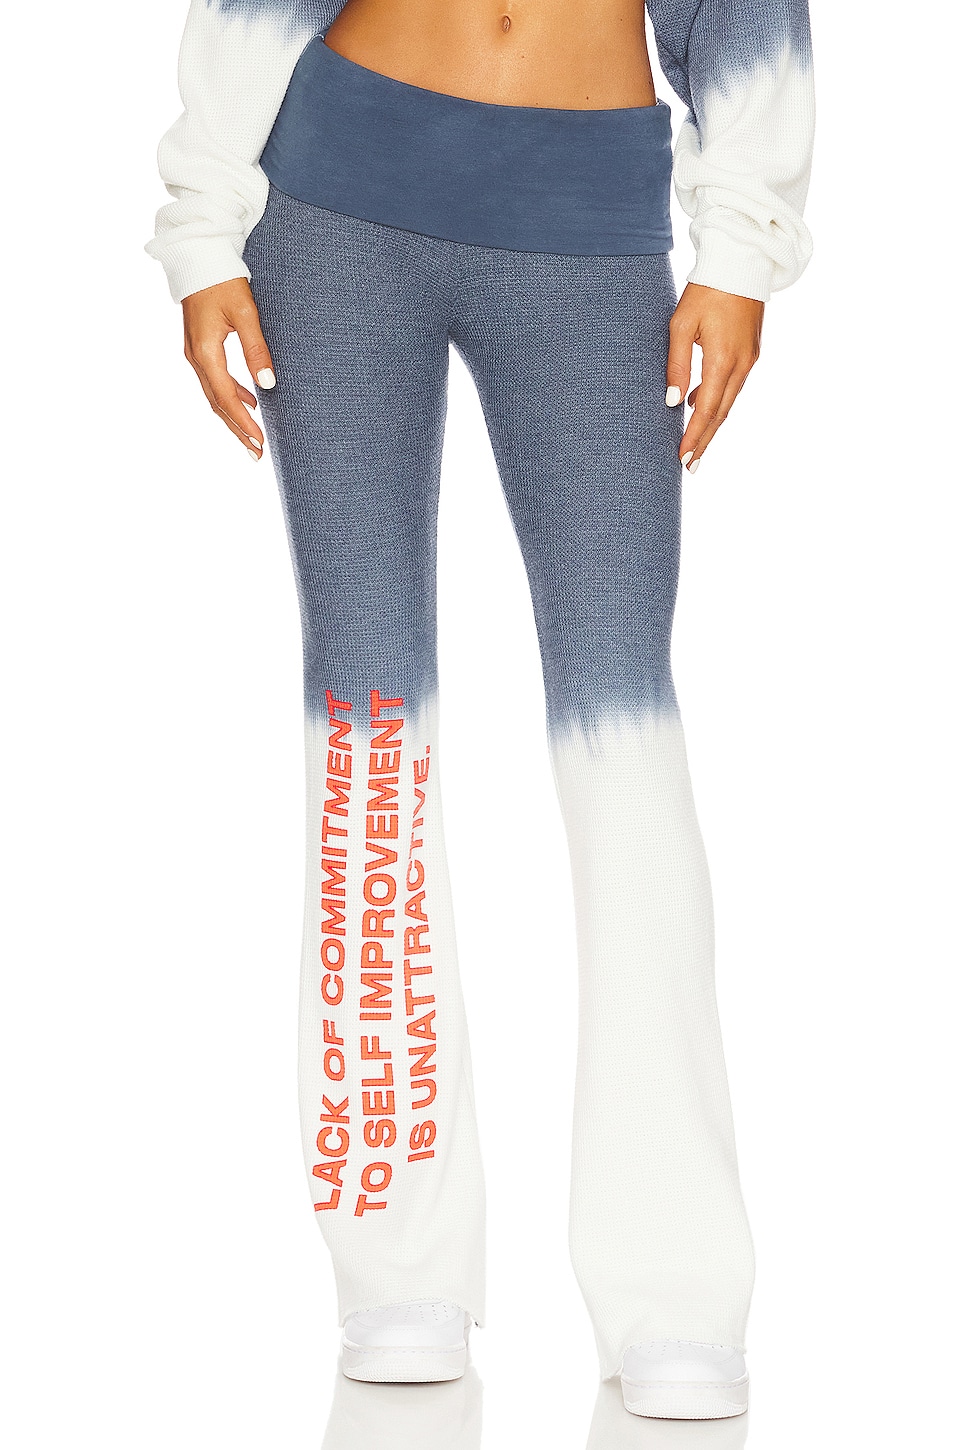 Boys Lie Commitment Issues Sweatpants in Cloud | REVOLVE